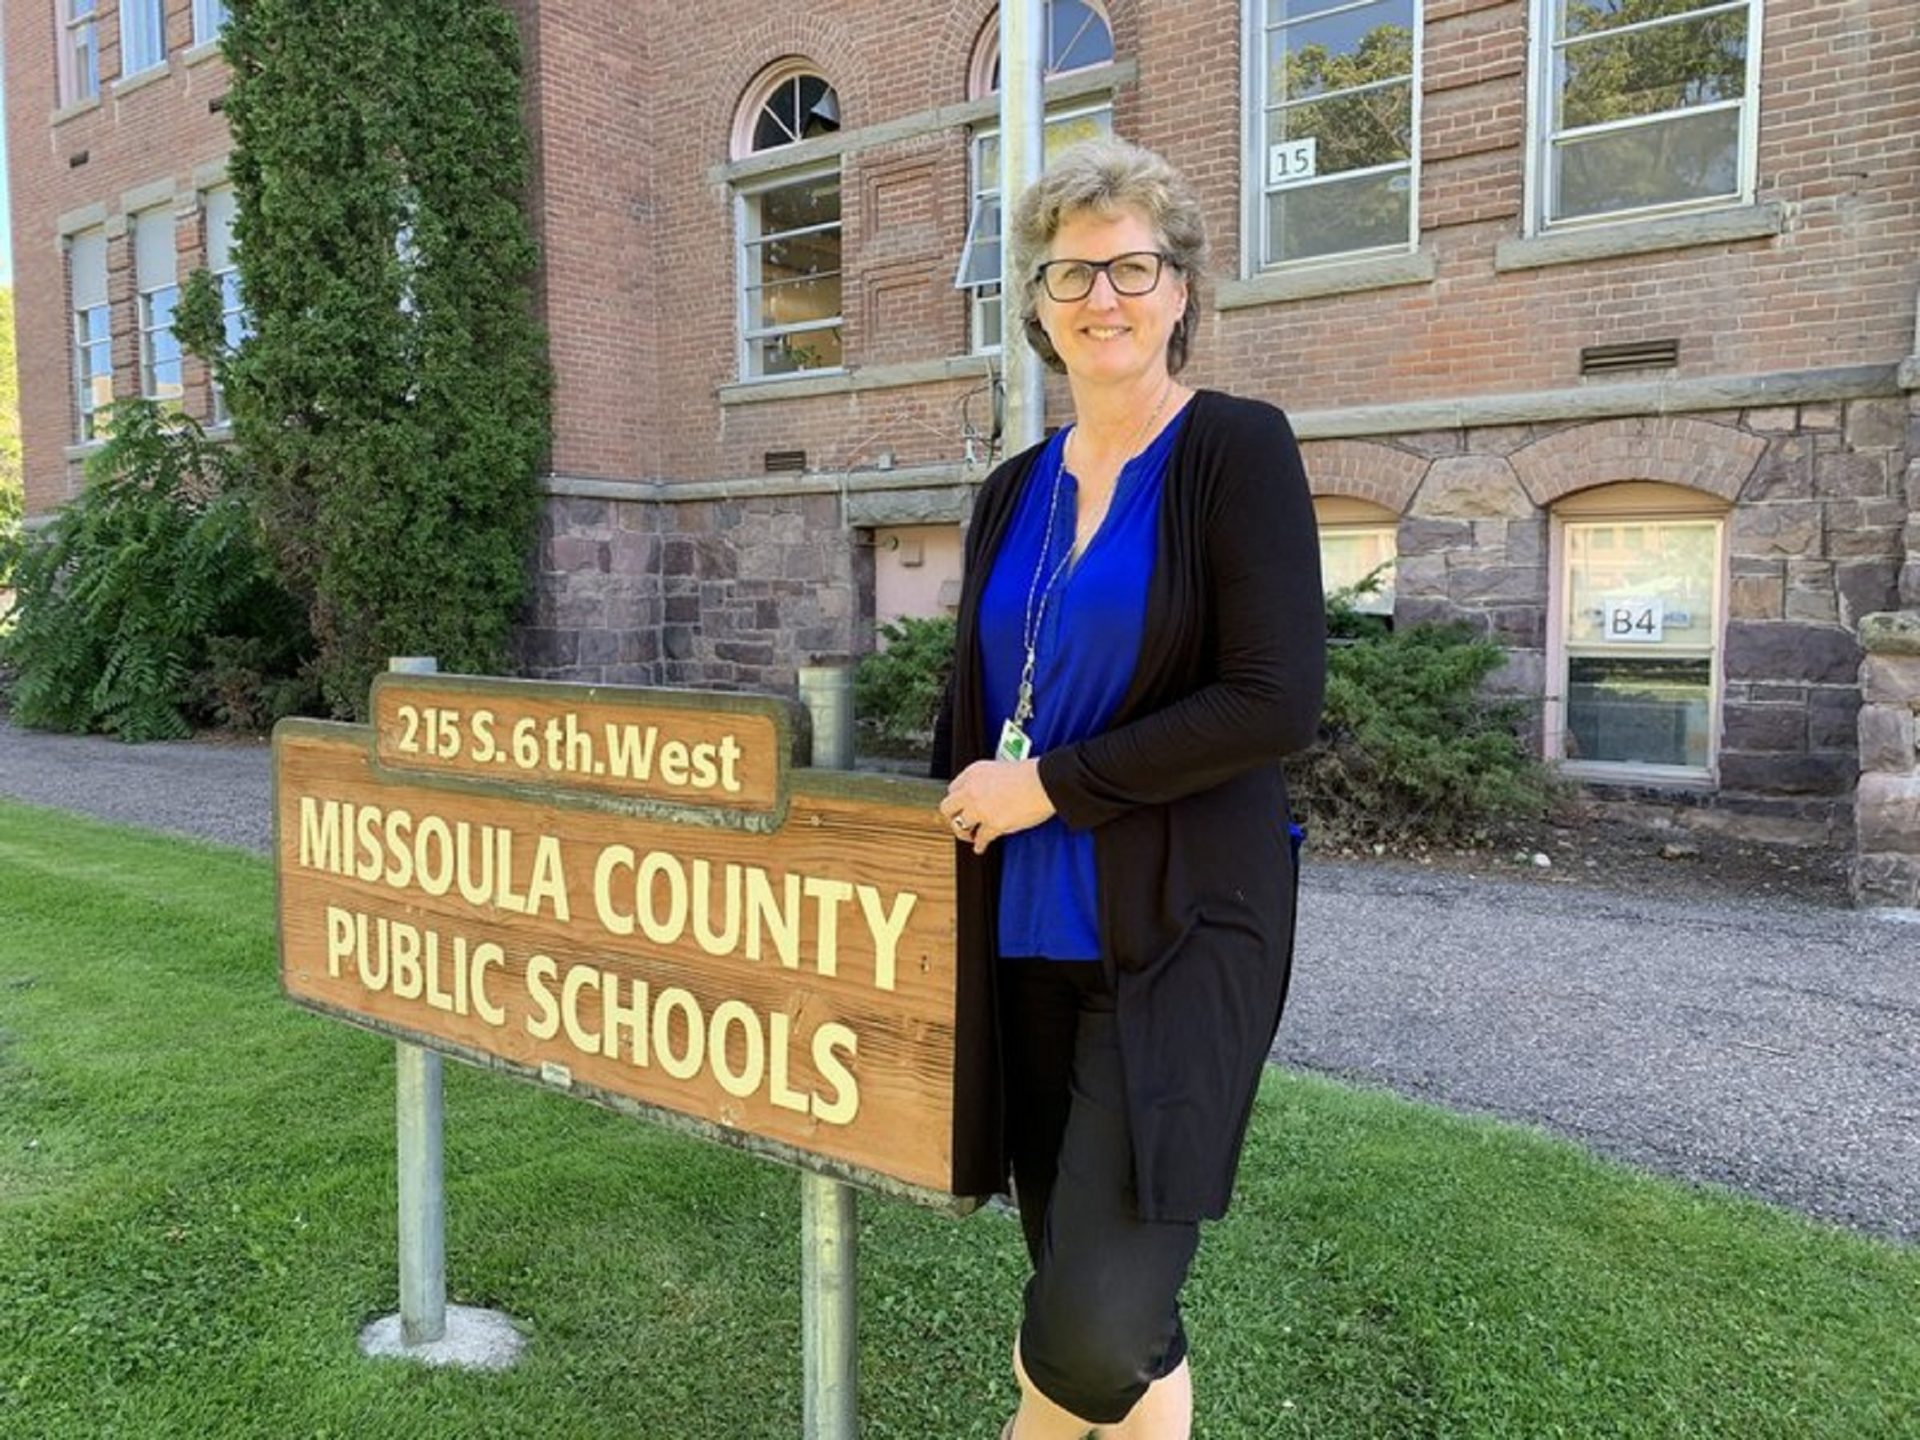 Shirley Lindberg, the English Language Learner Coordinator for Missoula County Public Schools, says only 1.5% of the district is ELL students, and among those, almost half are refugees from Africa and the Middle East.